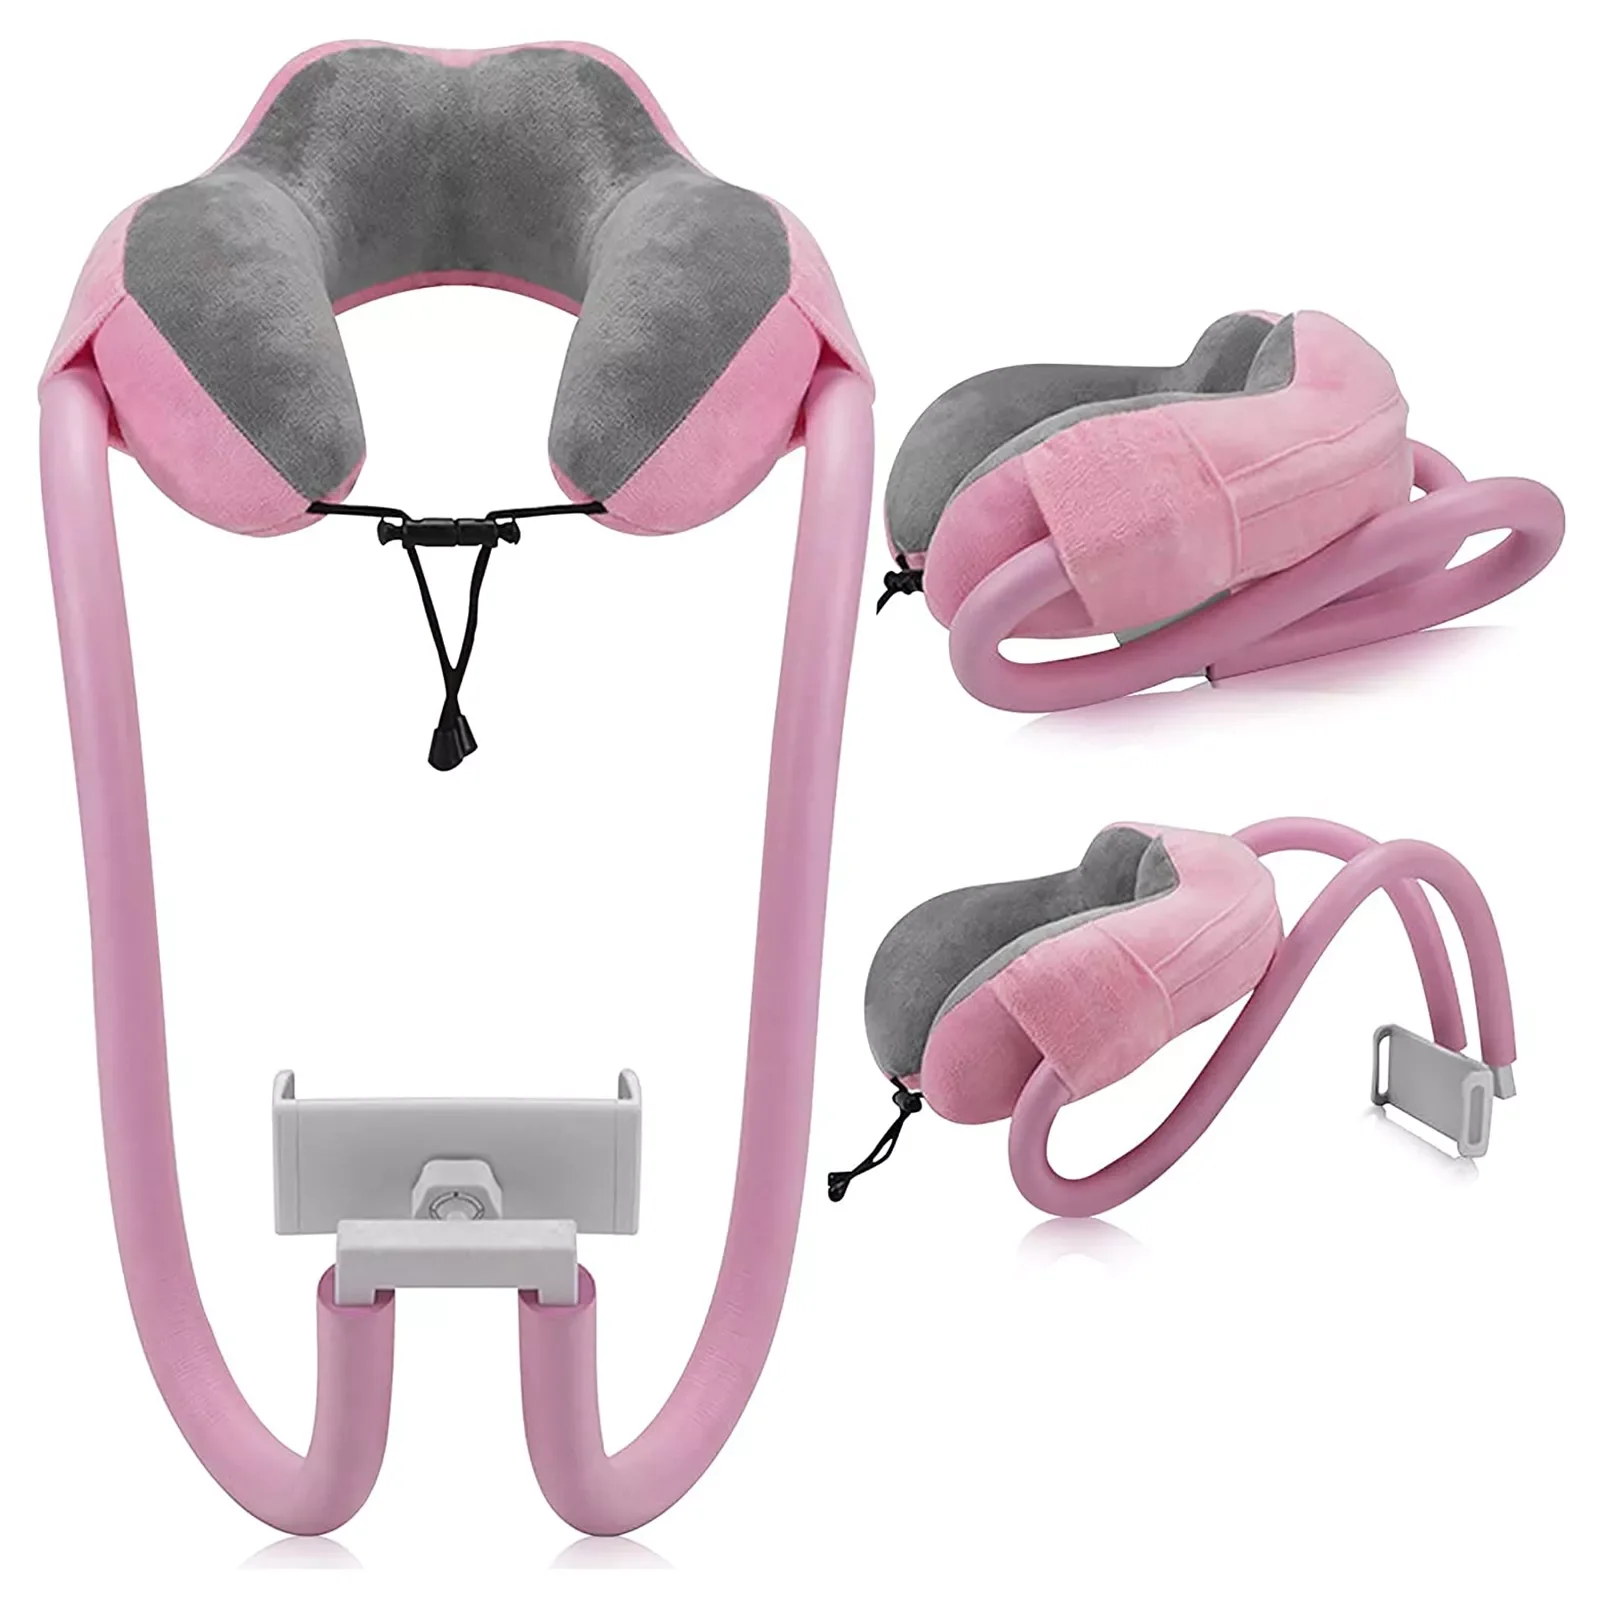 

Mobile Phone Holder With Lazy Cushion U-shaped Pillow Nap Pillow Memory Foam Cervical Spine Neck Pillow Tablet Computer Stands